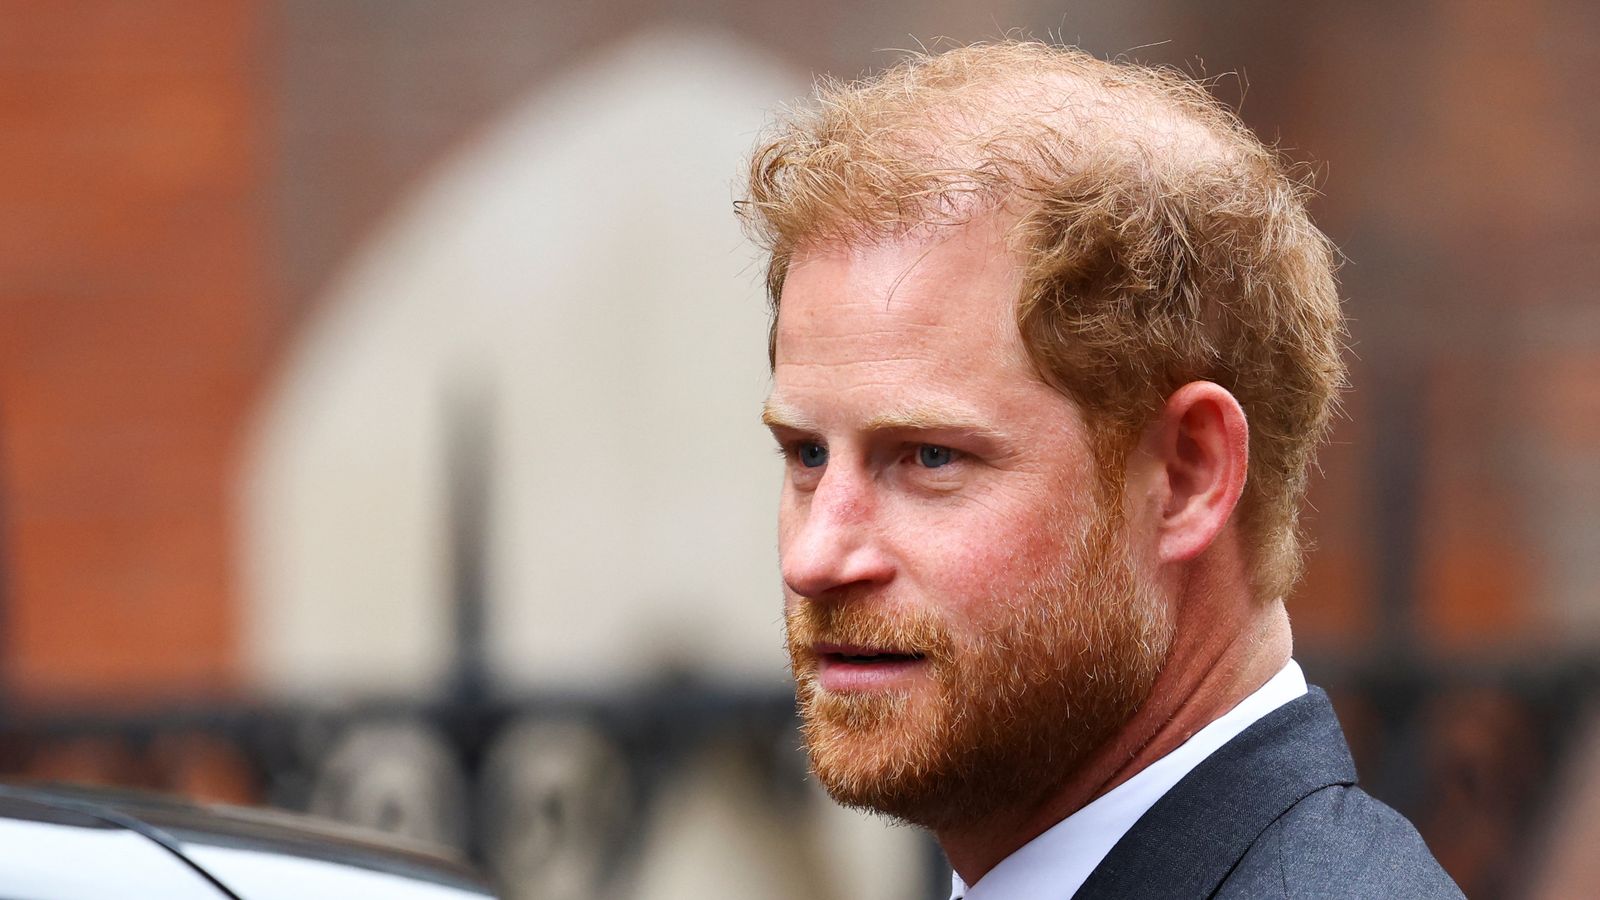 Prince Harry v Mirror Group Newspapers: Everything you need to know about the Duke of Sussex's latest court case